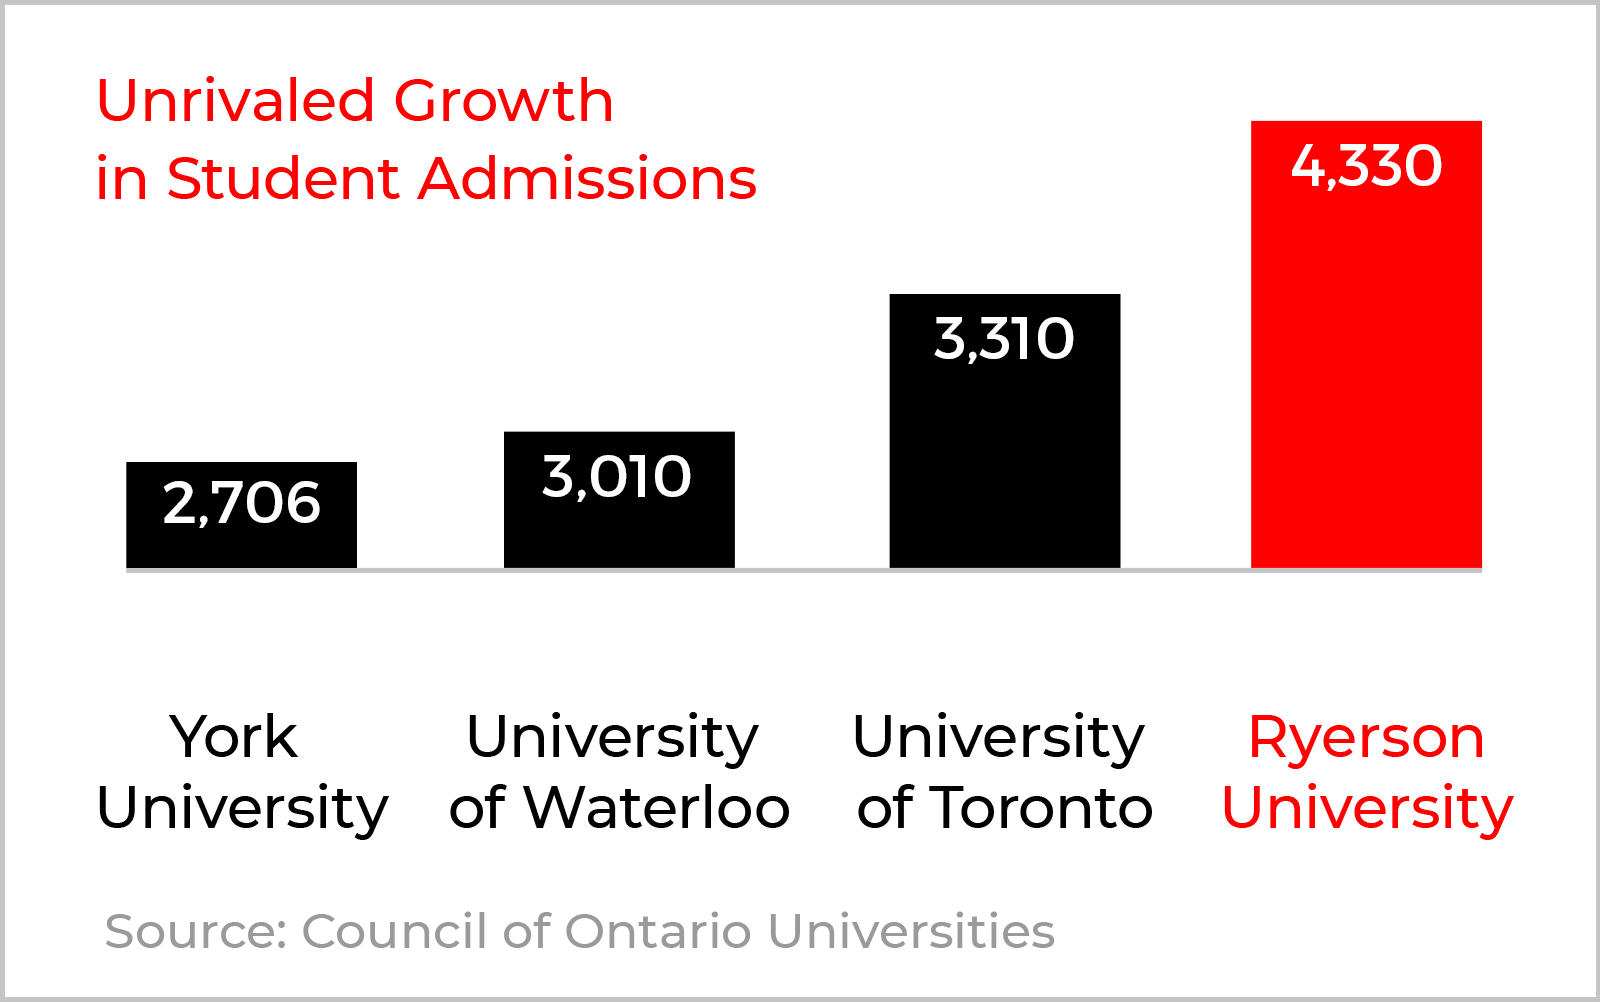 Unrivaled Growth in Student Admissions